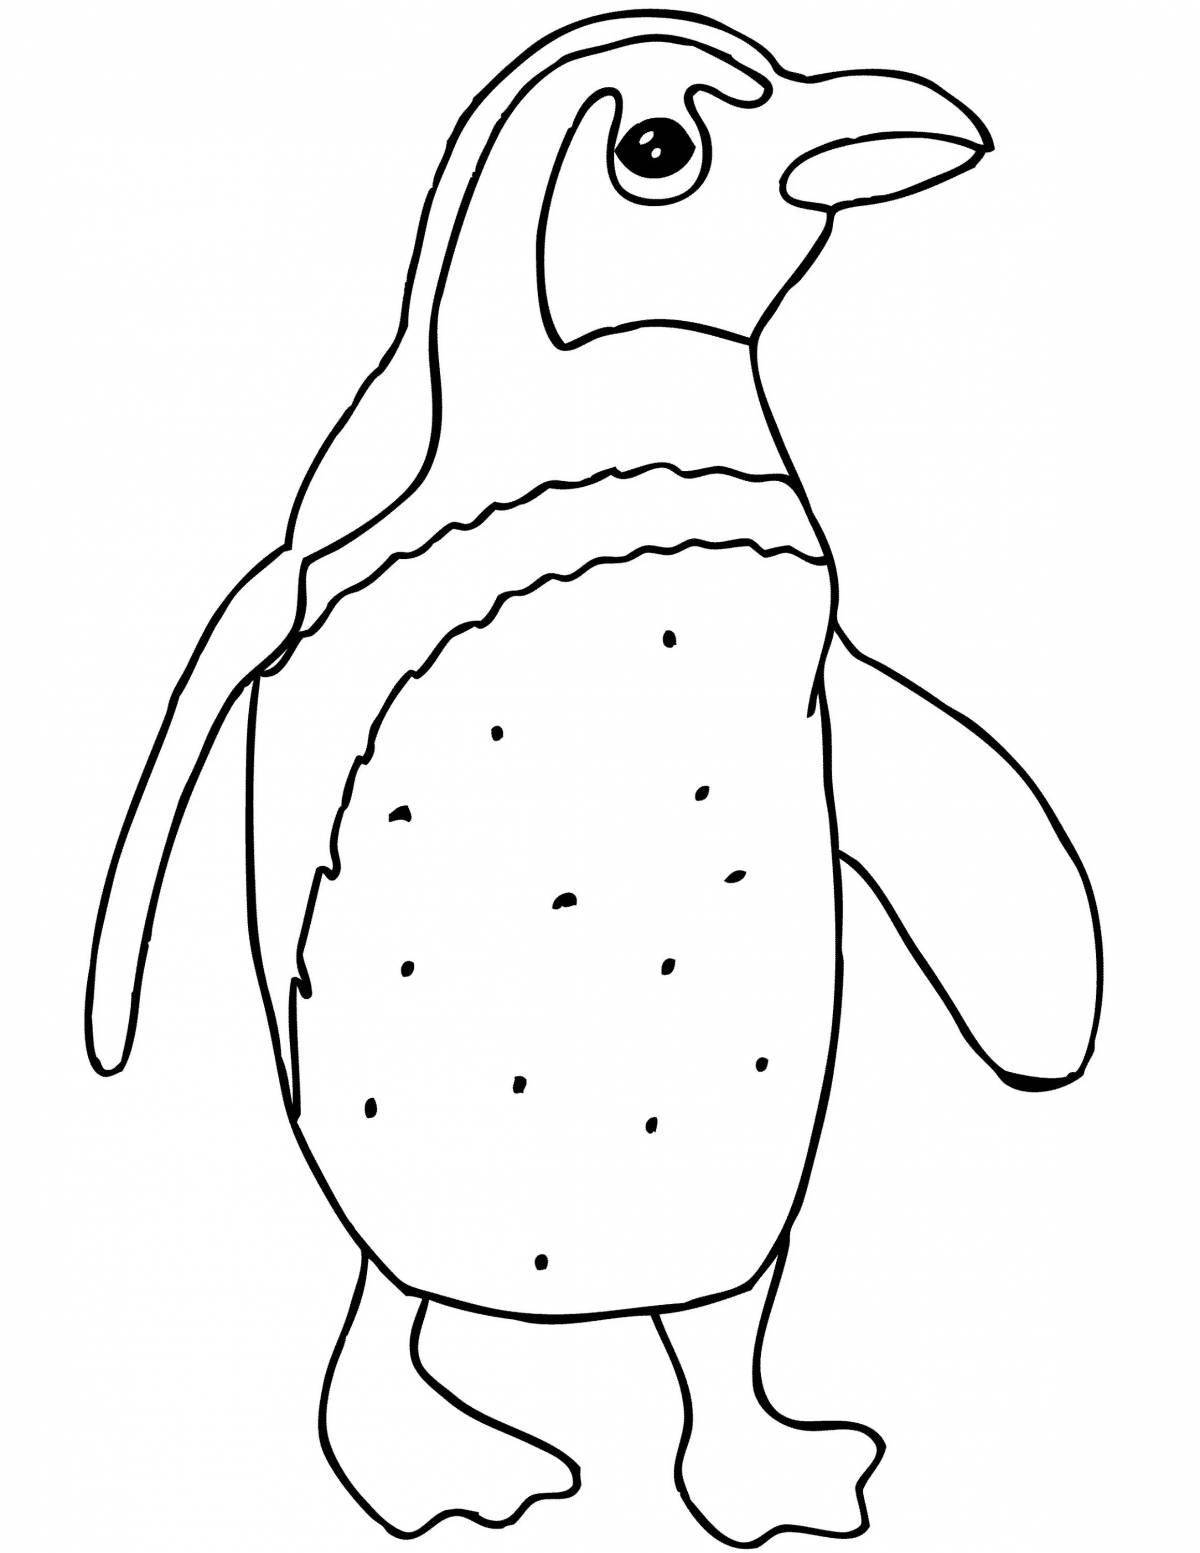 Penguin chic coloring book